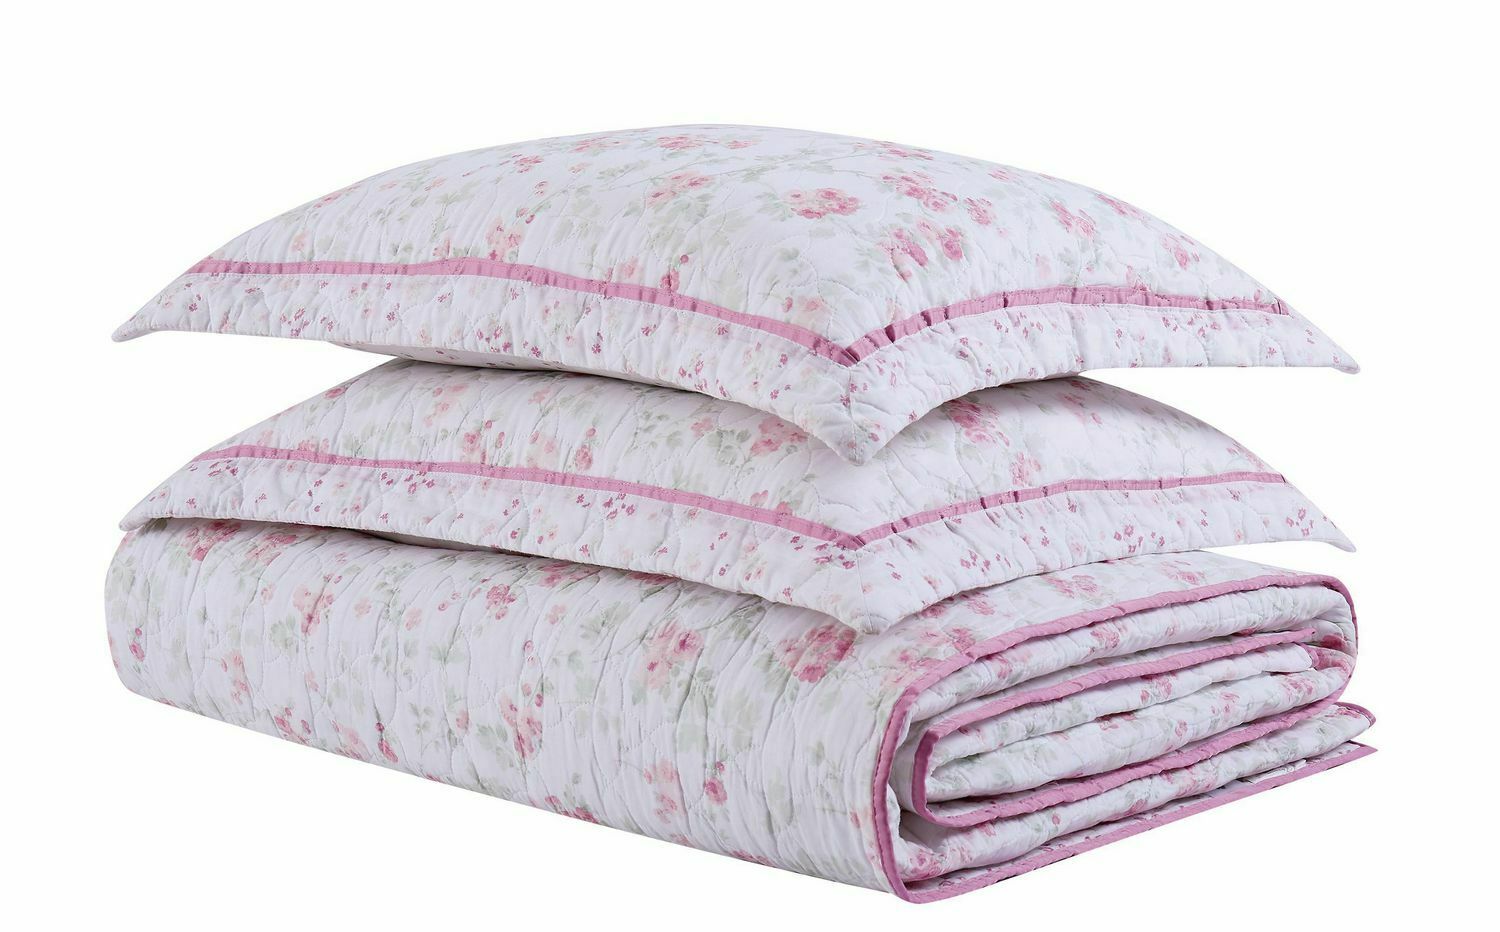 The pillow shams and quilt of a Cherry Blossom set from Shabby Chic